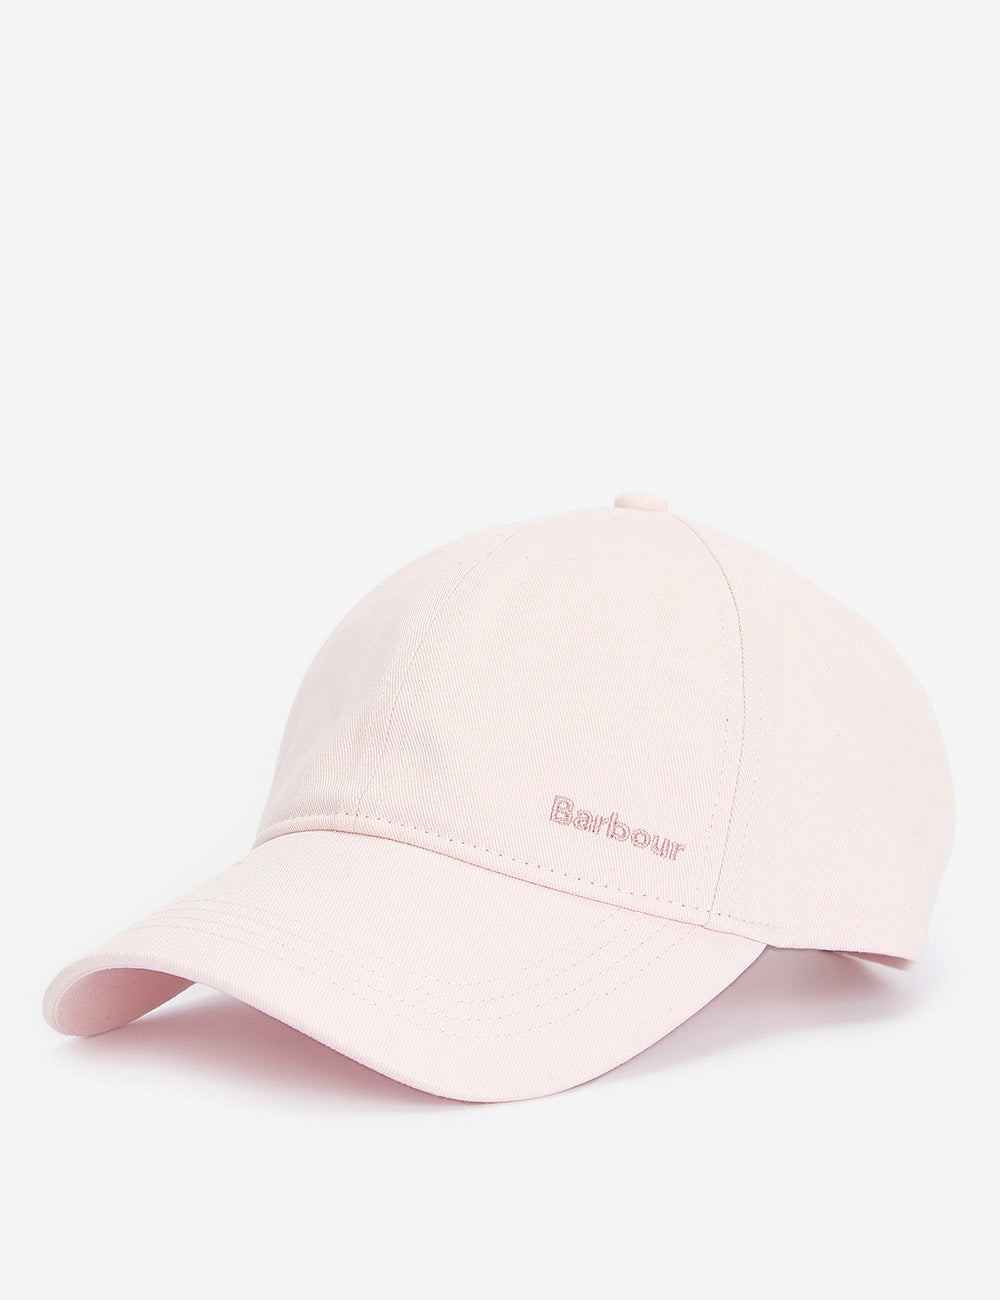 Barbour Olivia Sports Cap - Shell Pink